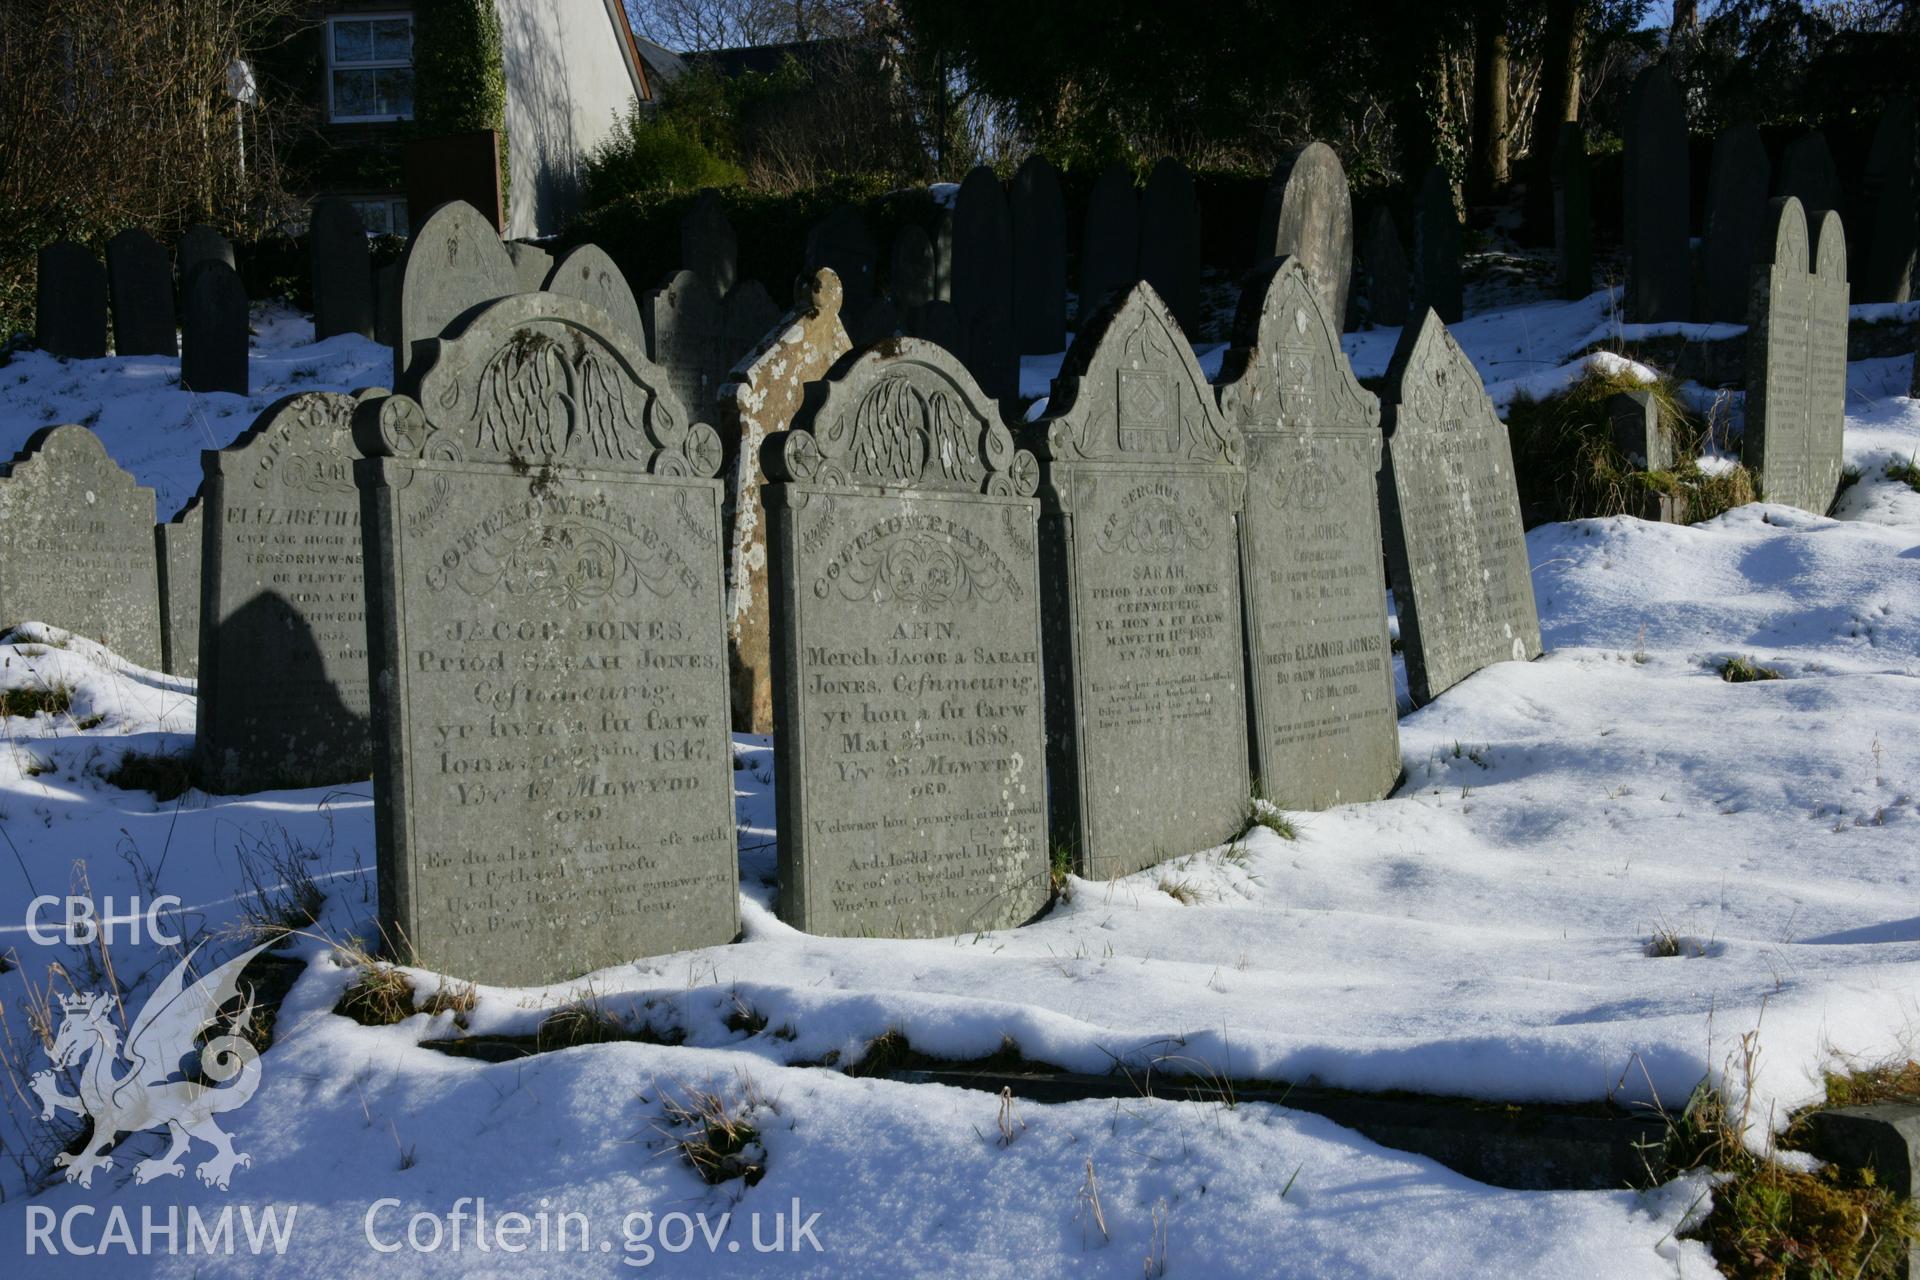 Salem Chapel, general view of gravestones in south-east part of cemetery, with snow.